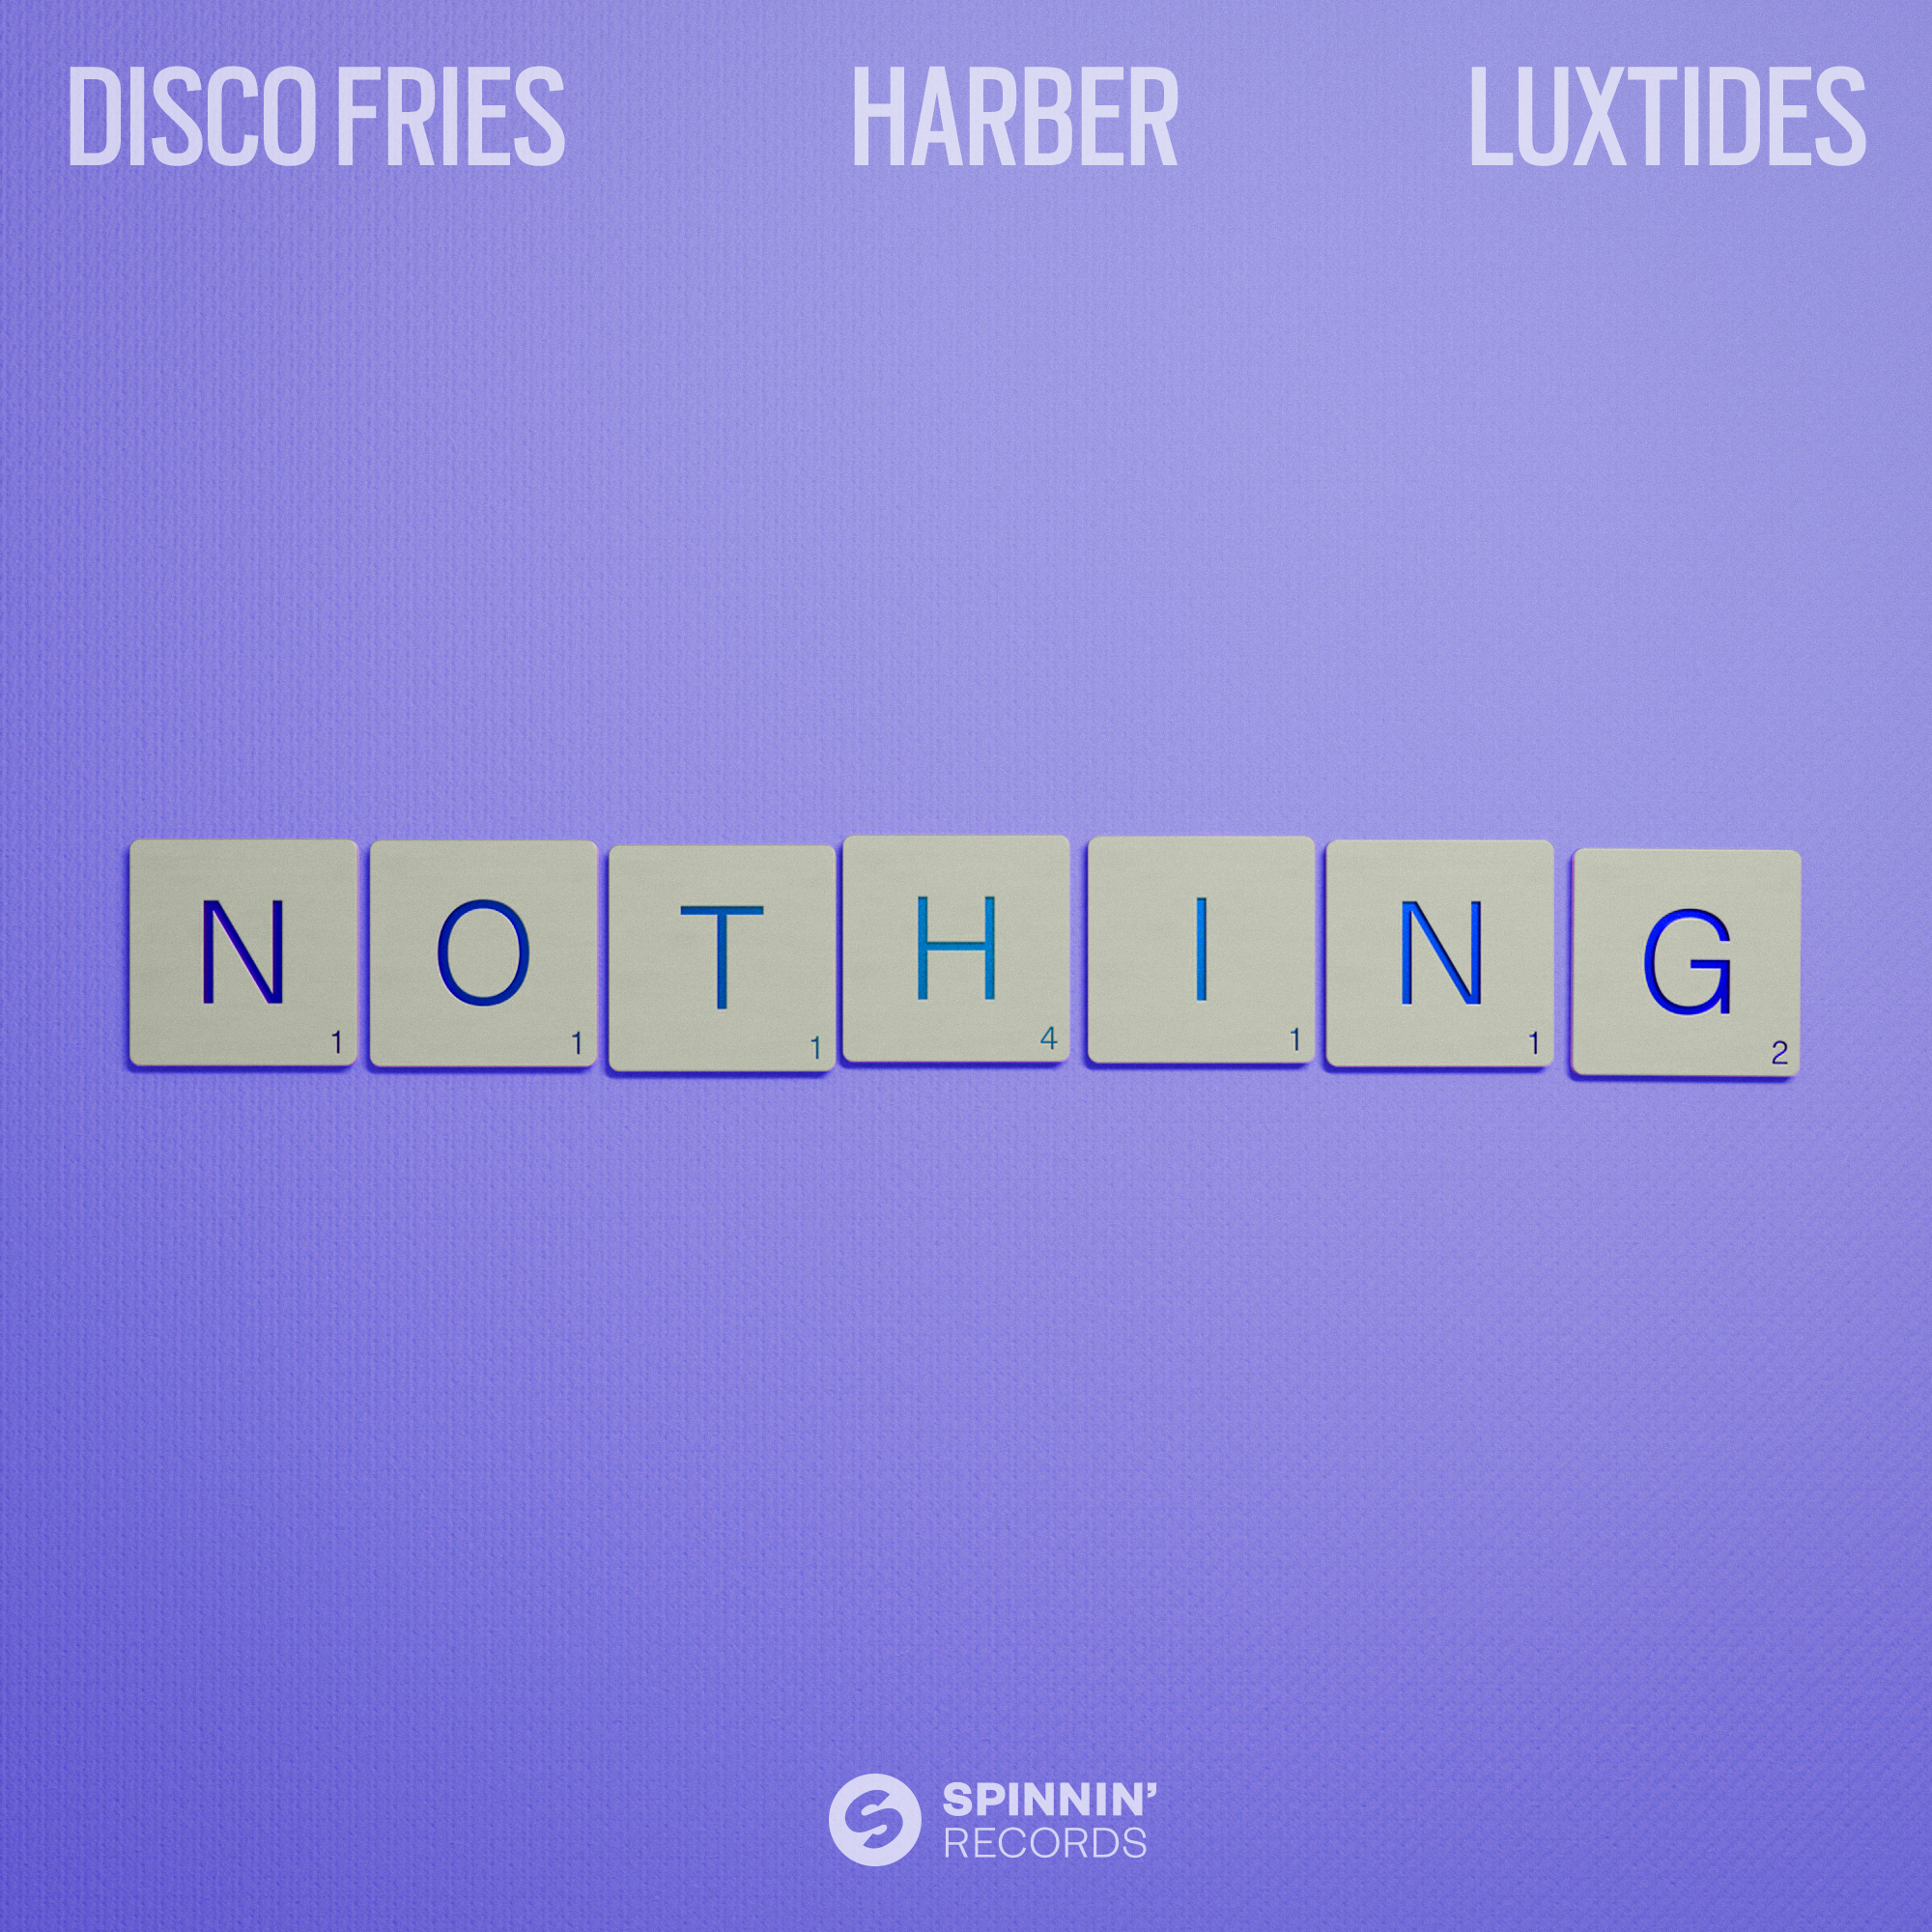 Disco Fries, HARBER, Luxtides – Nothing [Final Artwork]